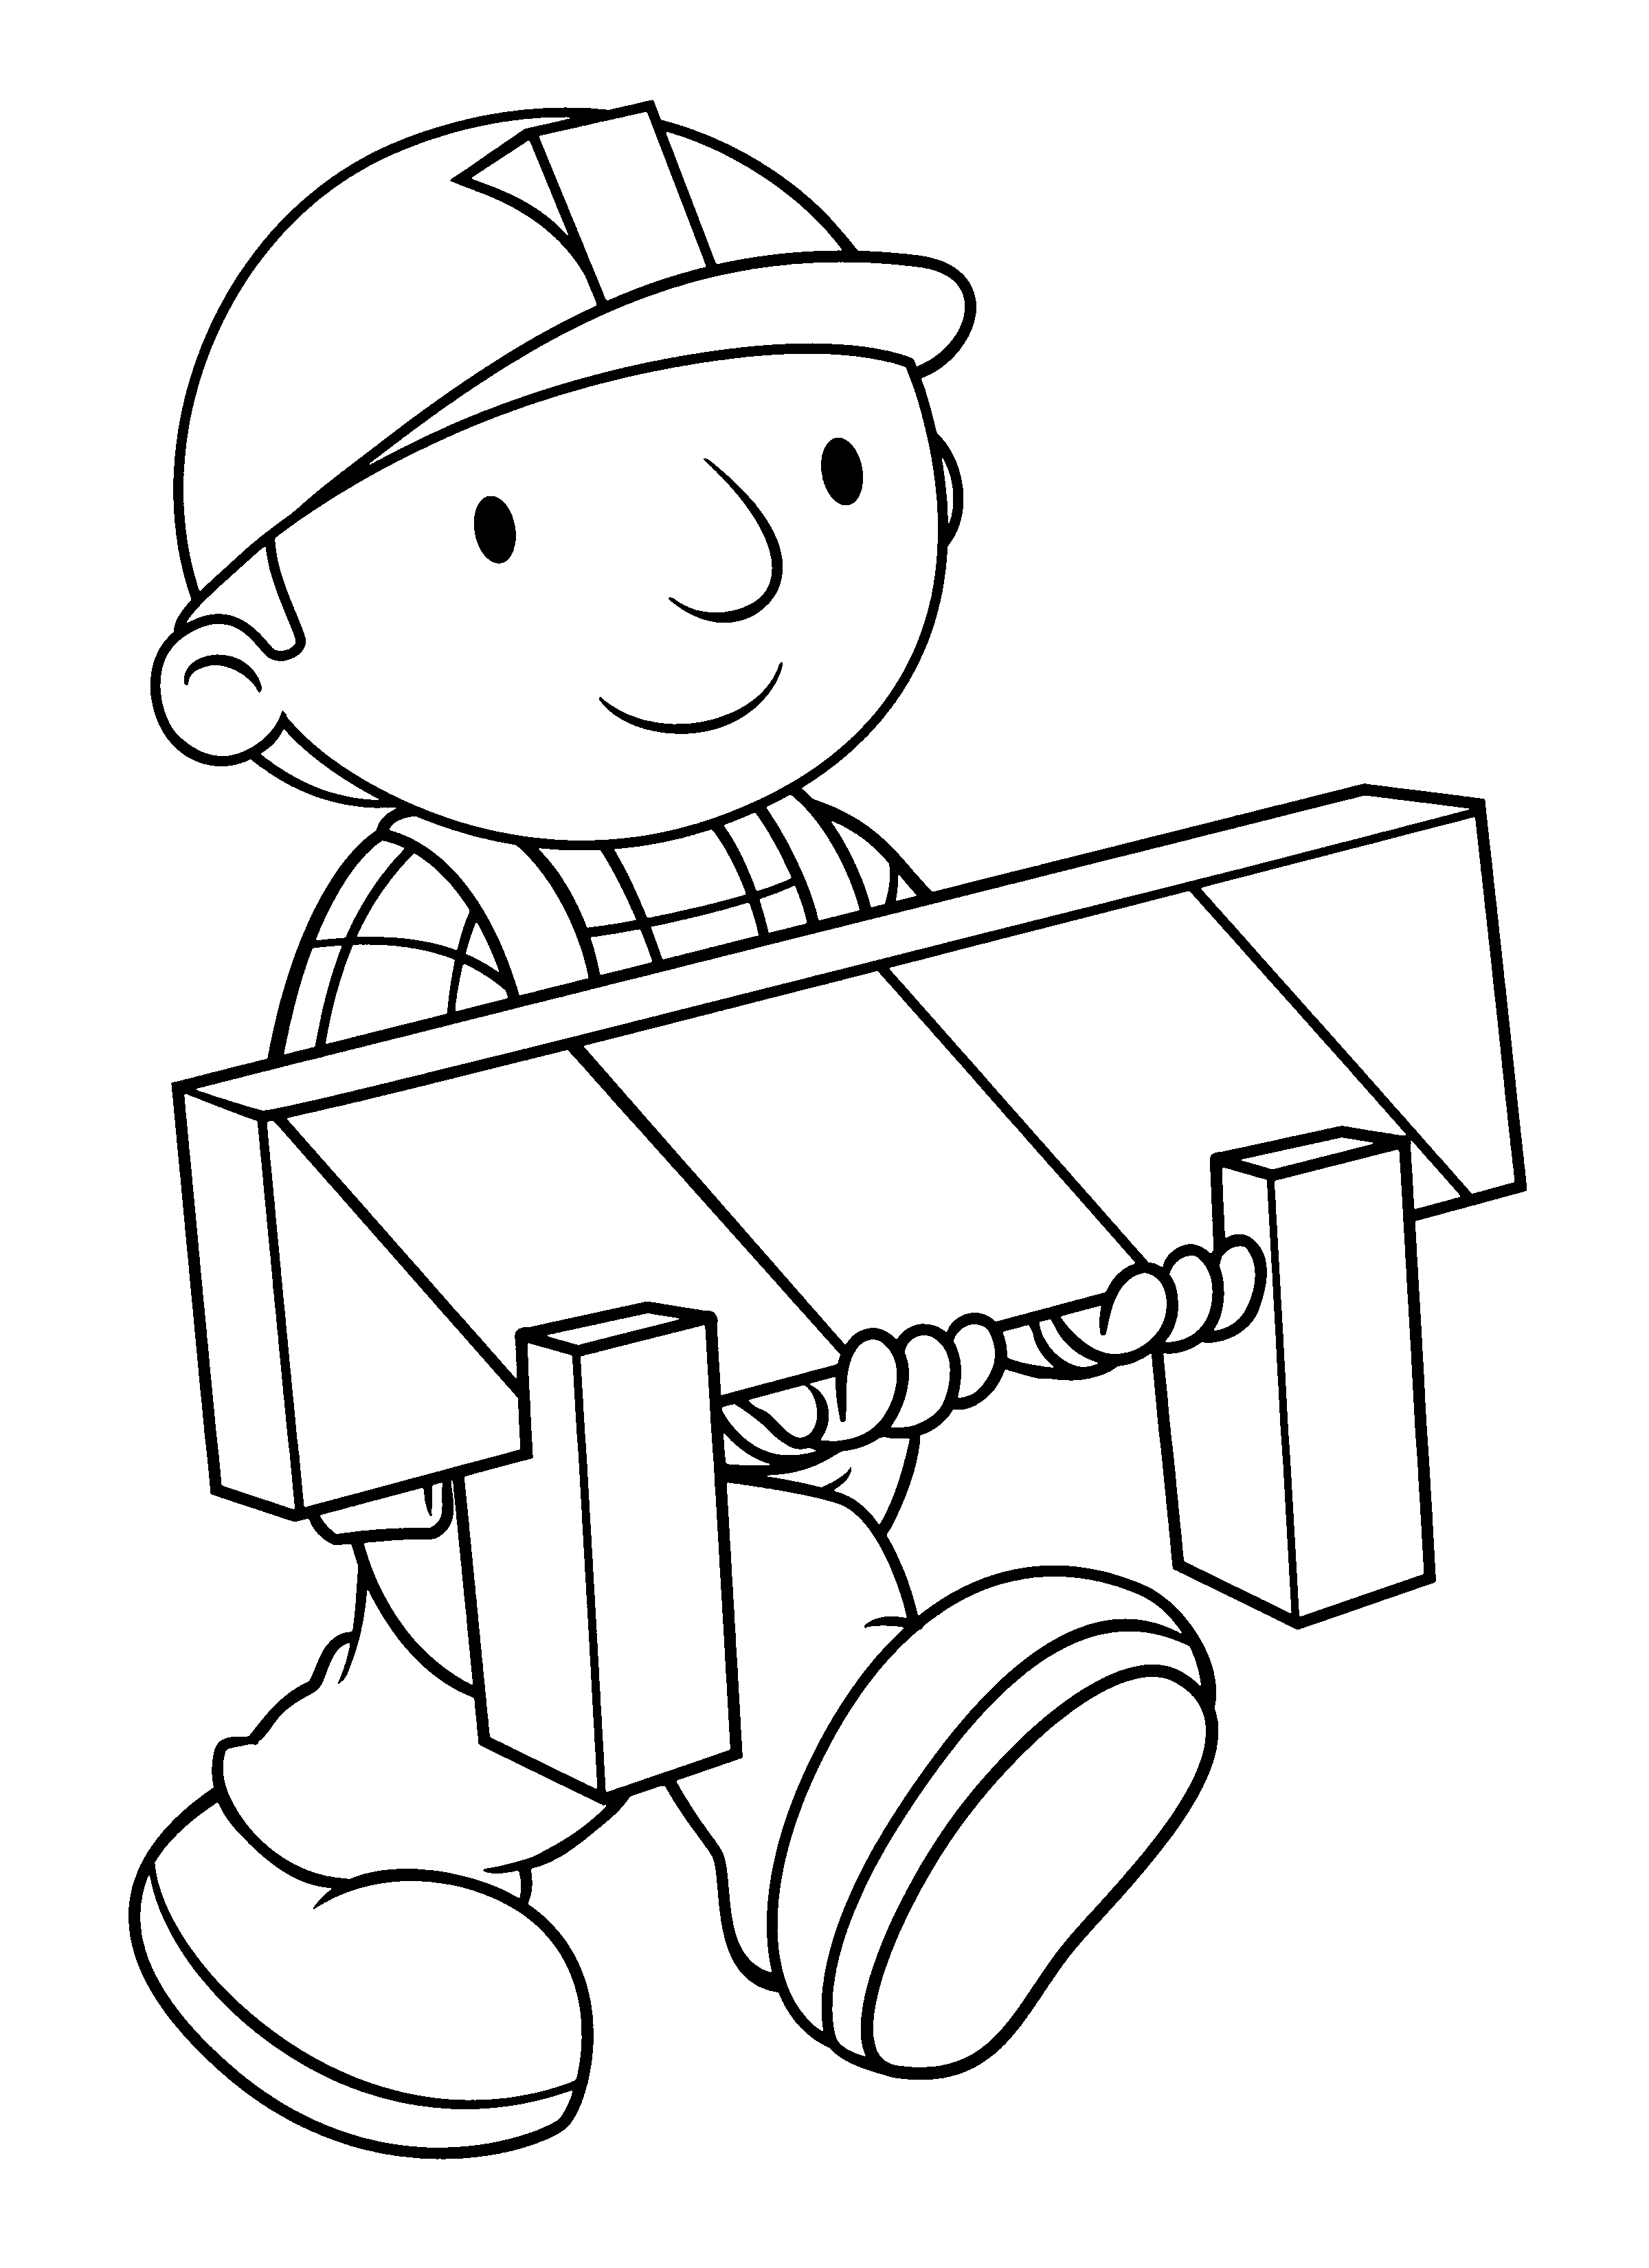 Bob the builder coloring pages to download and print for free